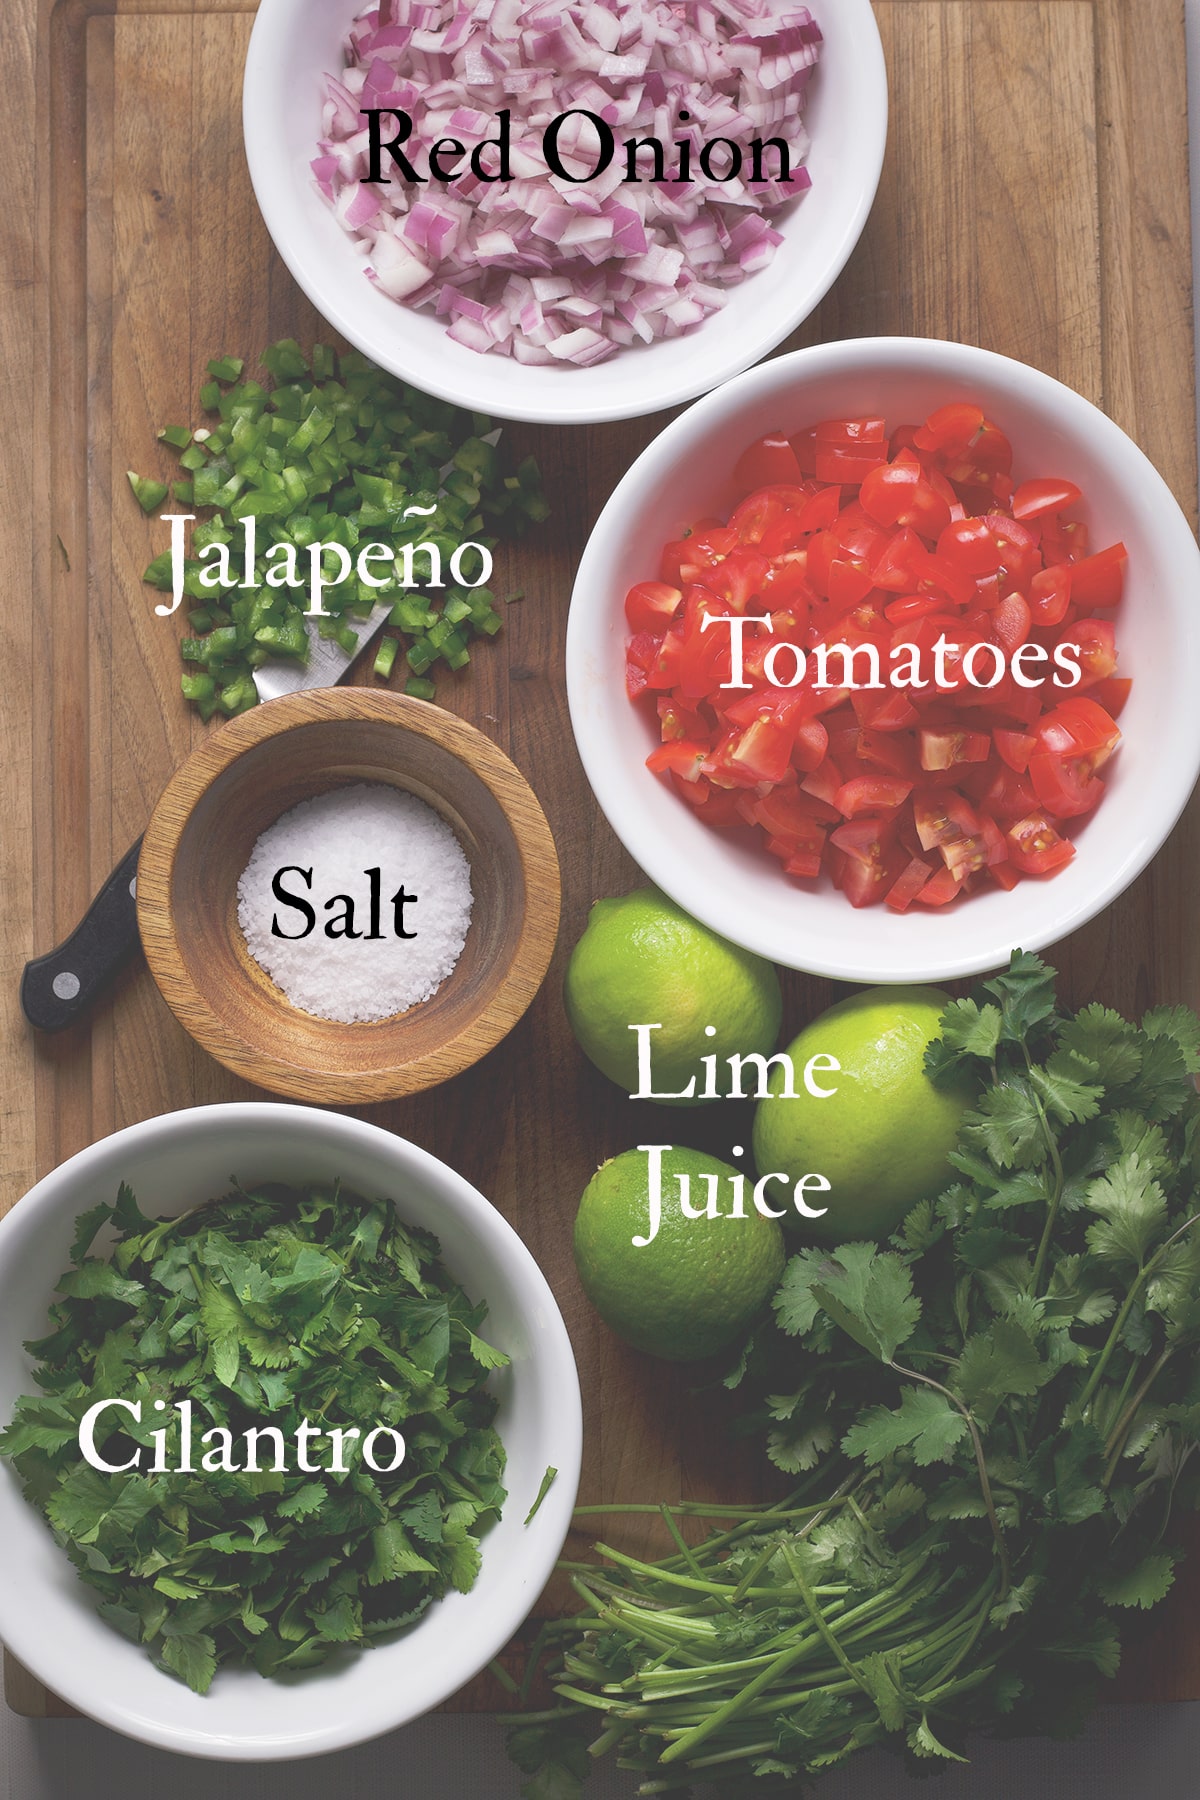 All the ingredients needed to make pico de gallo. 